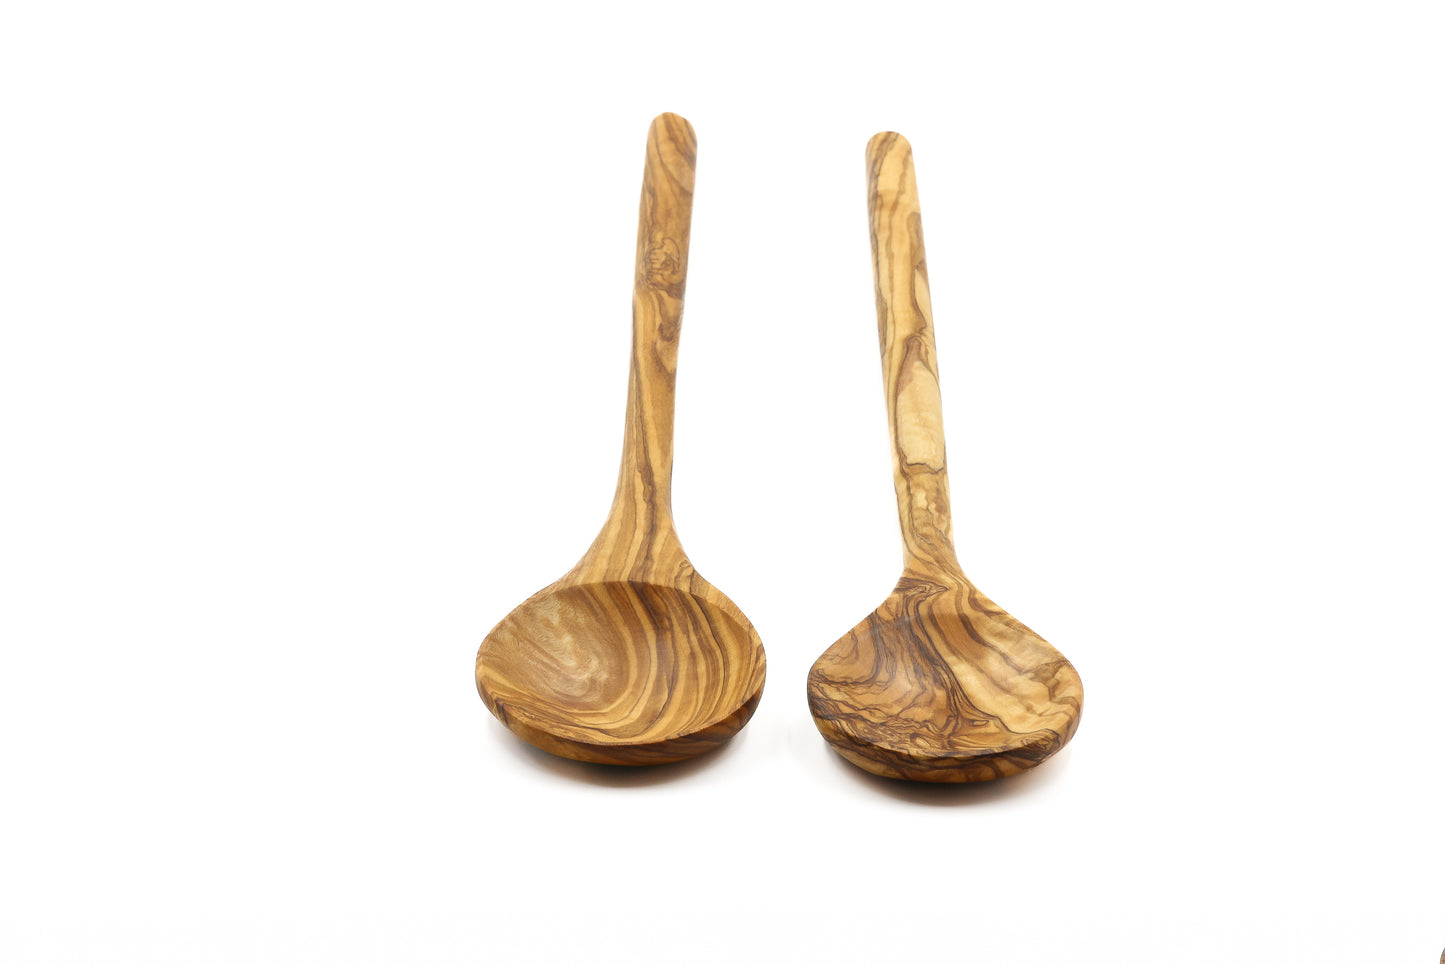 Crafted from olive wood, a stirring, mixing, and cooking essential